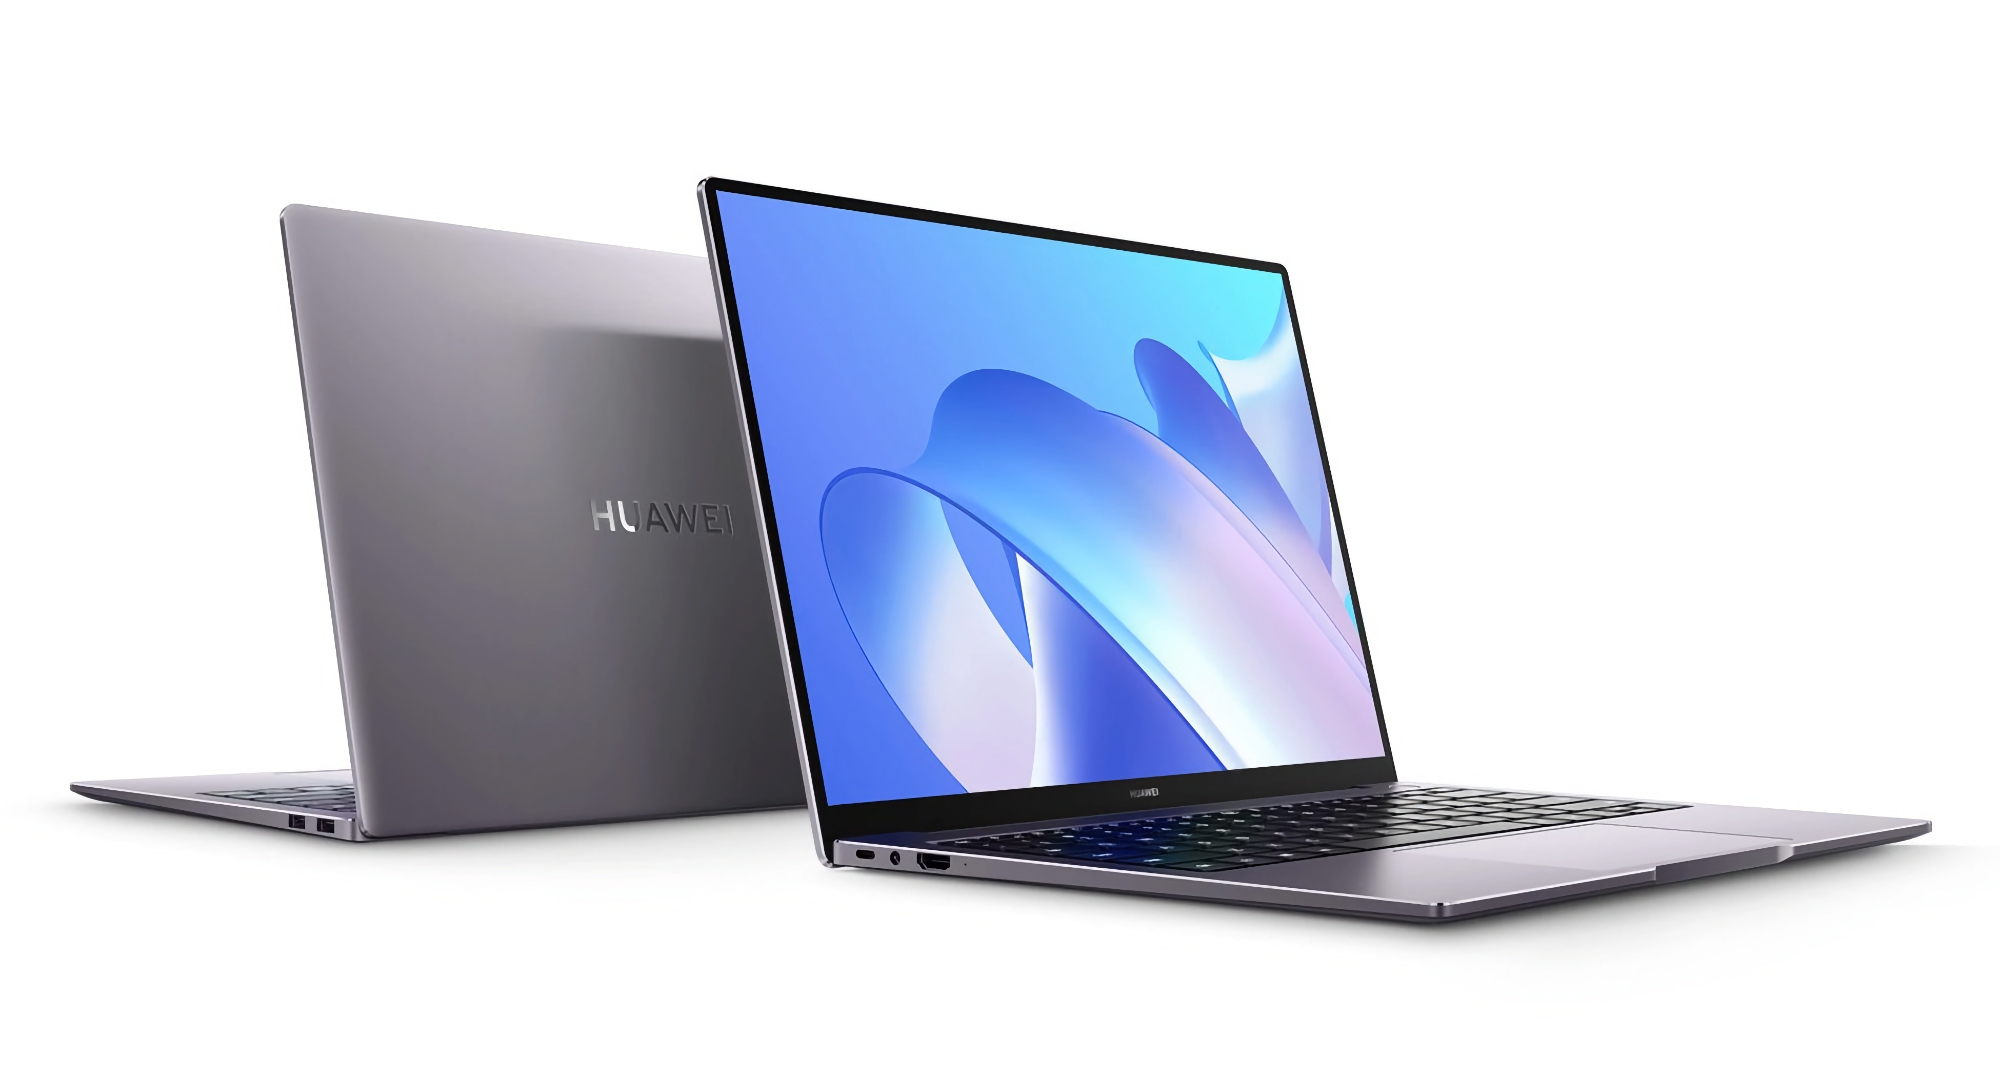 Huawei is working on a new laptop with a Kirin chip on board, it could be shown alongside the Huawei Pocket S2